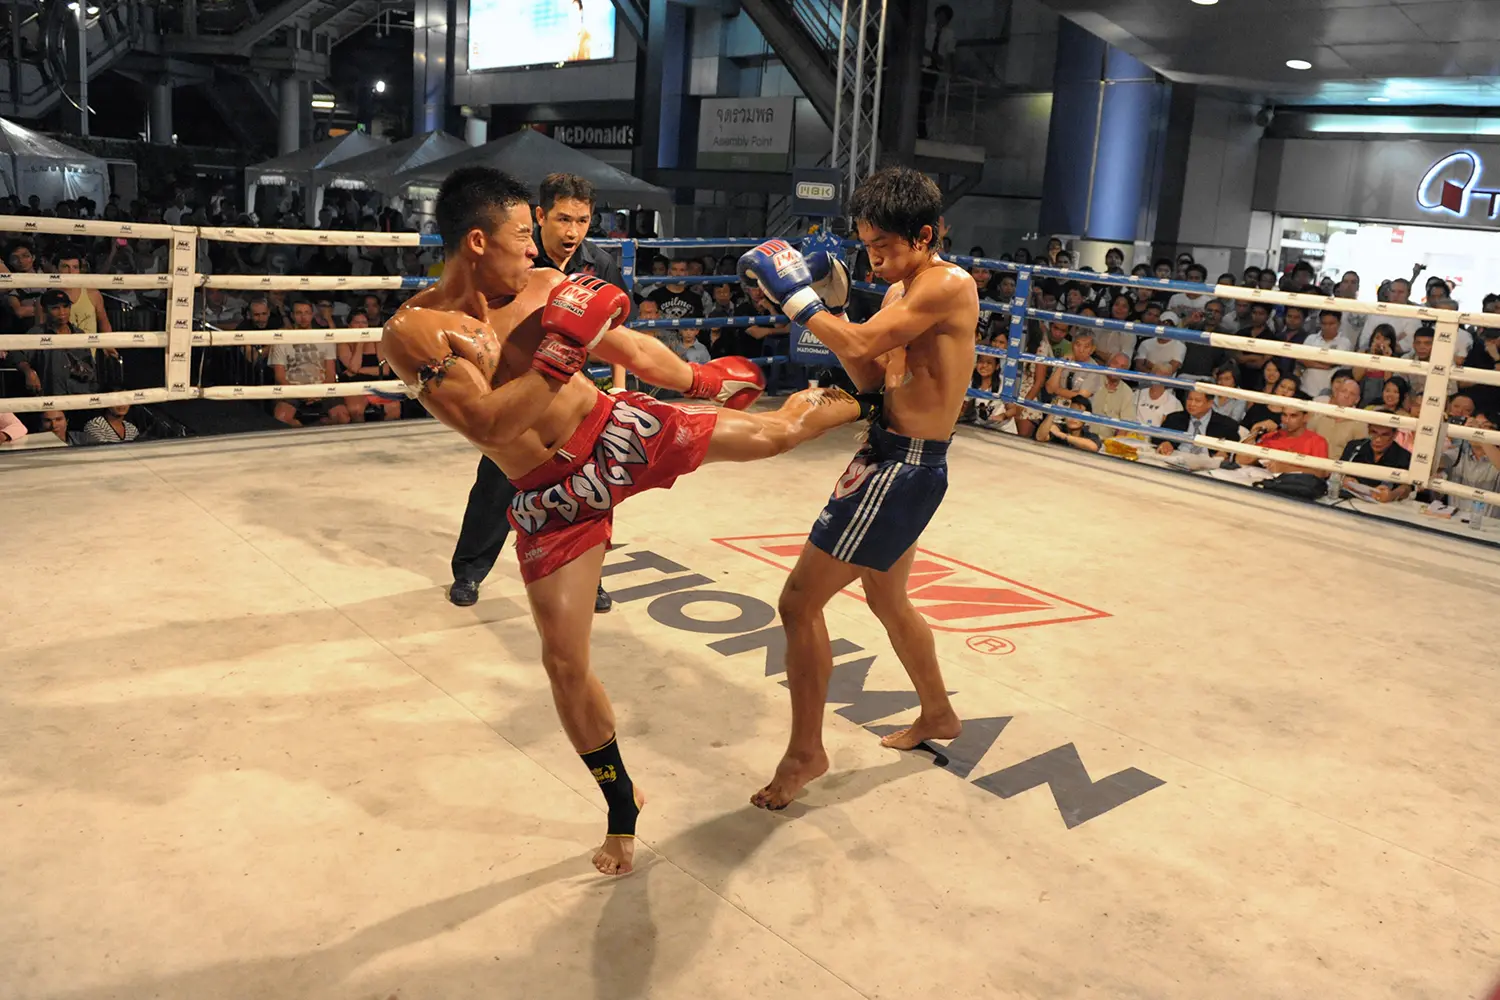 Muay Thai fighters compete in a Thai kickboxing match at MBK Fight Night in Bangkok, Thailand.